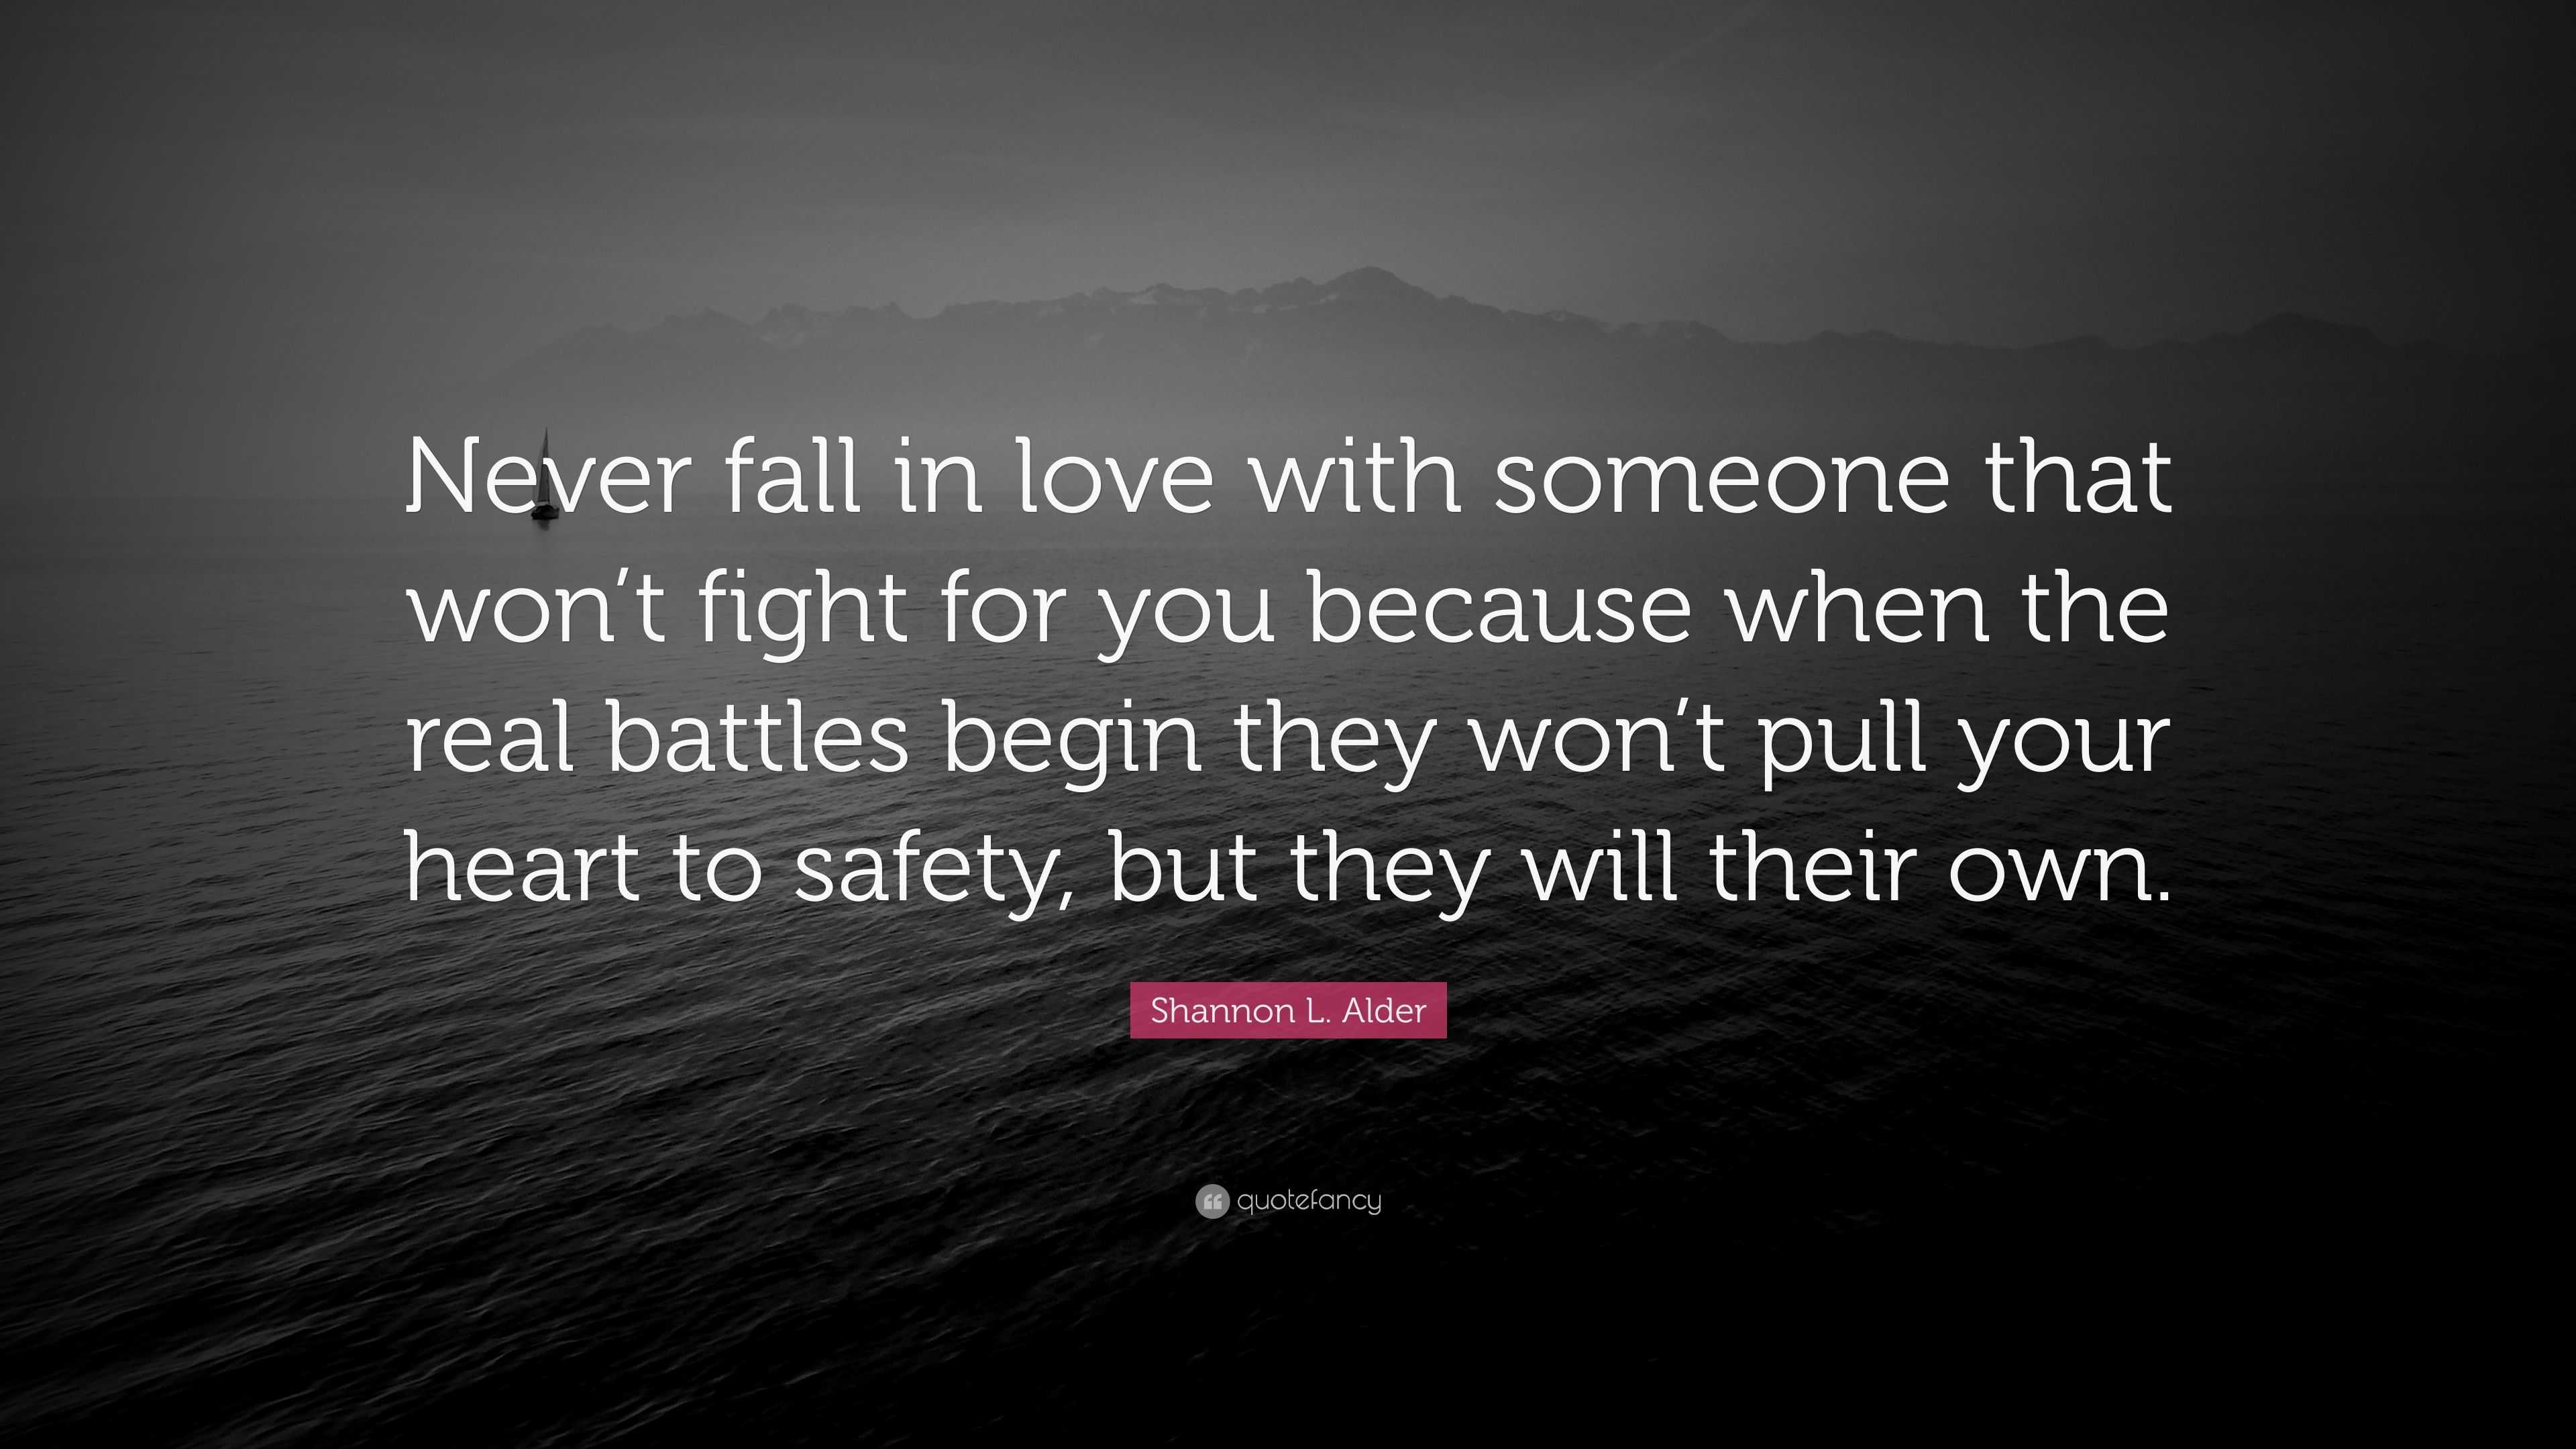 Shannon L Alder Quote “Never fall in love with someone that won